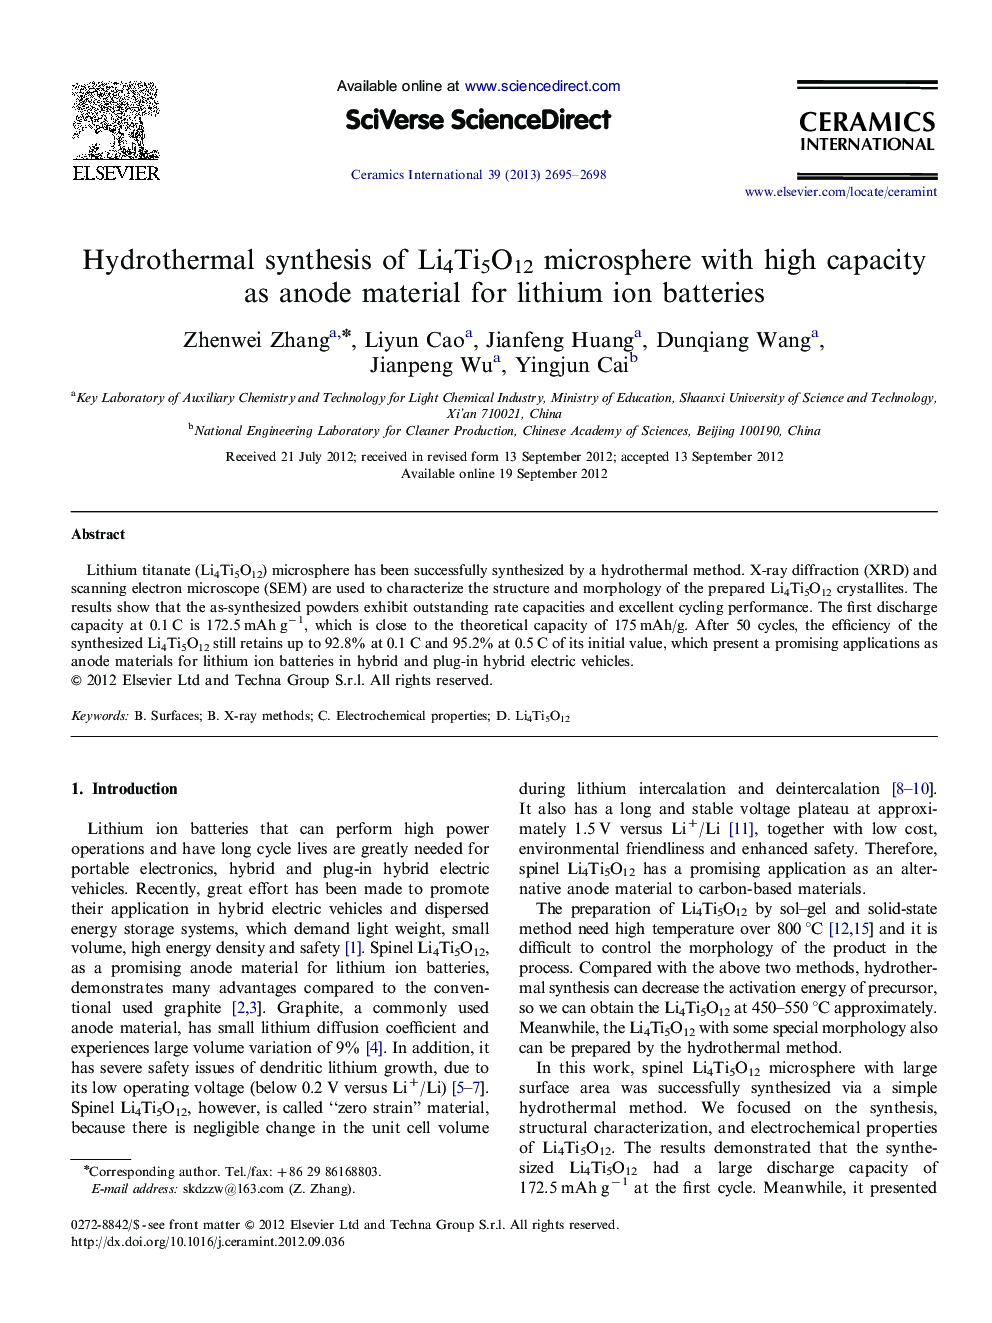 Hydrothermal synthesis of Li4Ti5O12 microsphere with high capacity as anode material for lithium ion batteries